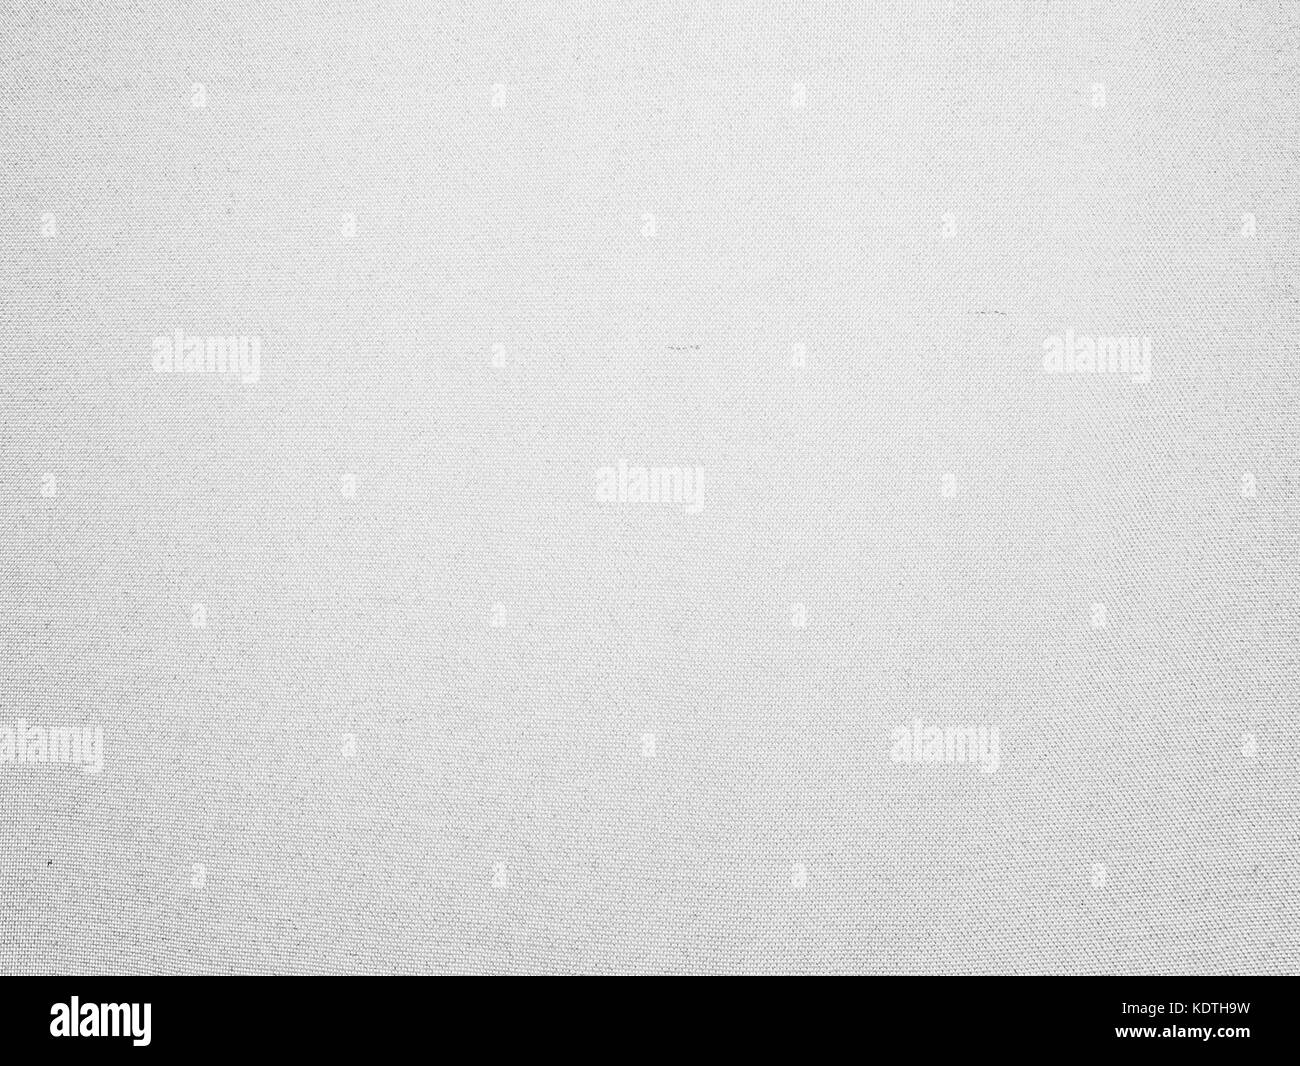 White fabric canvas texture background for design blackdrop or overlay background Stock Photo